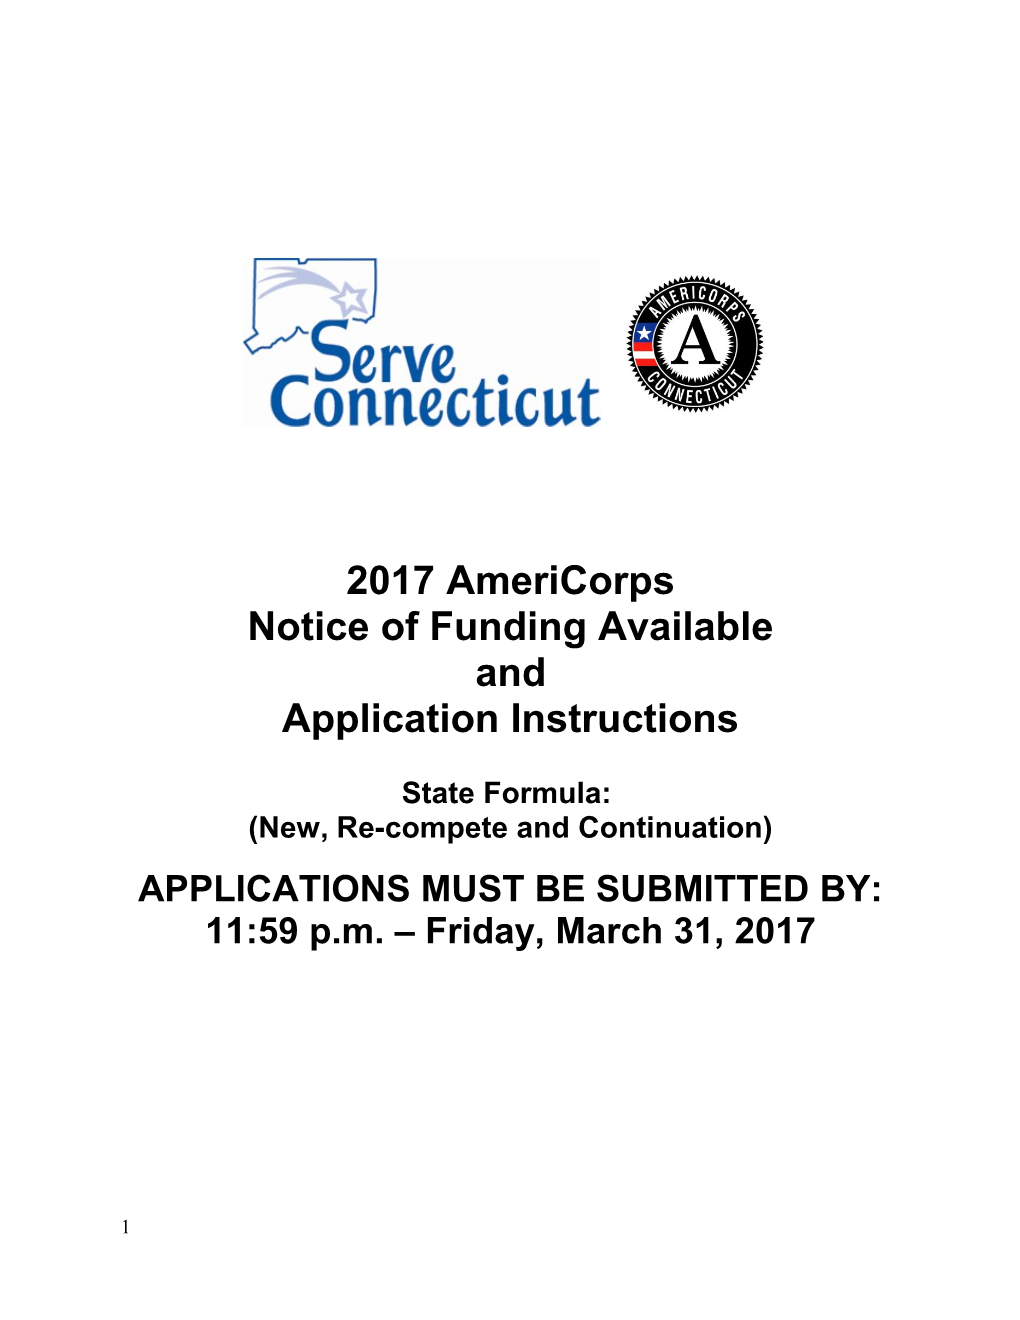 Notice of Funding Available